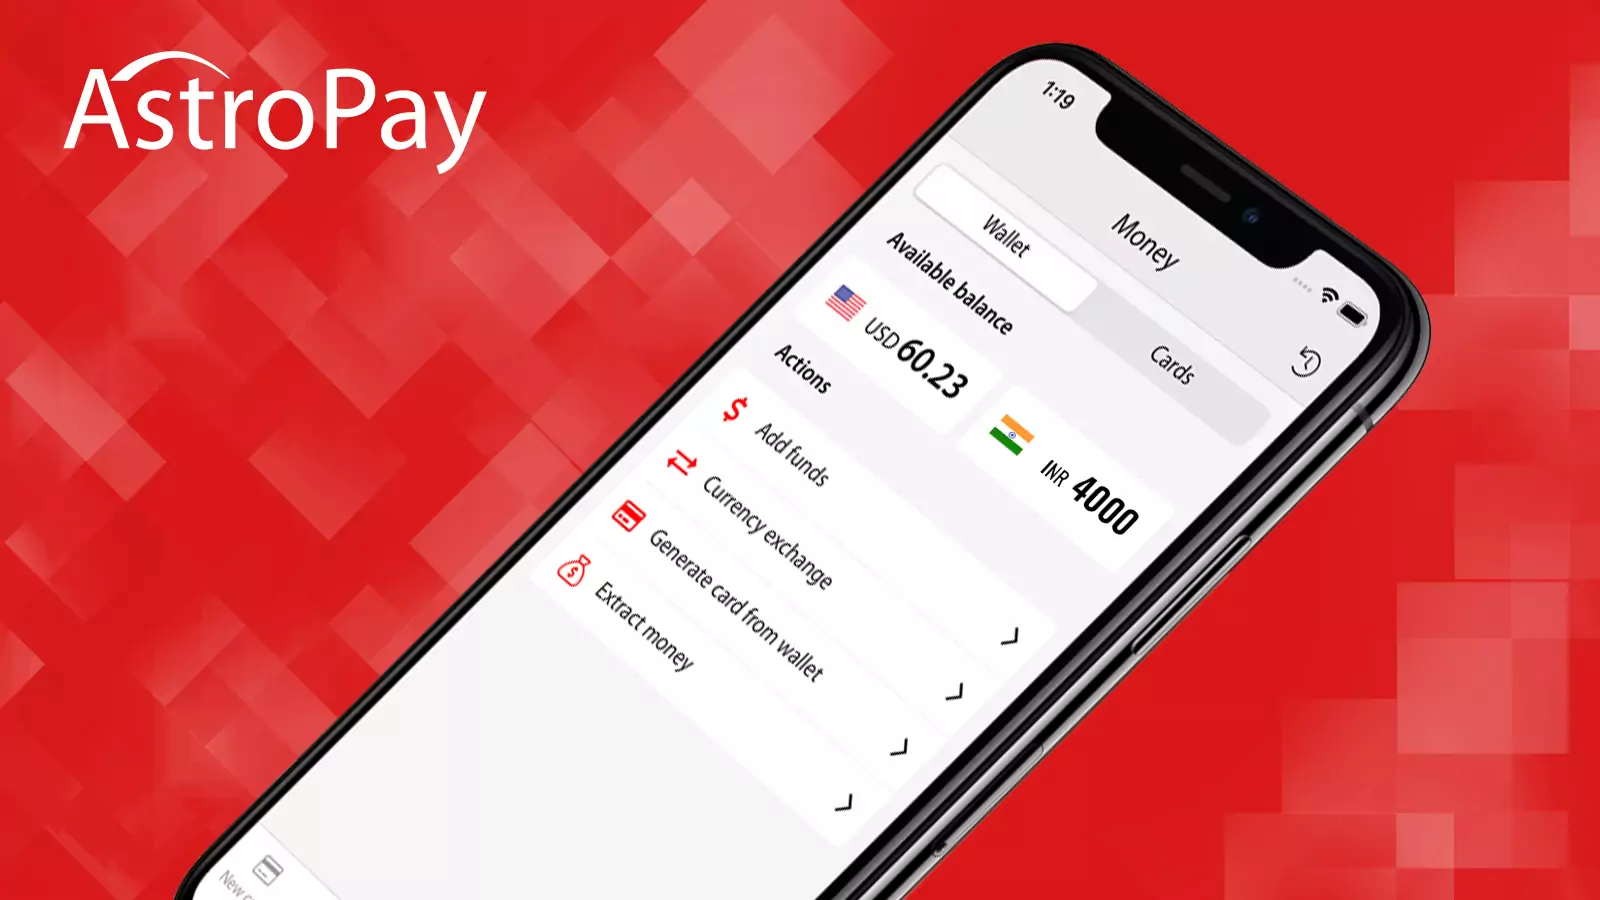 Download the Astropay mobile app, install it and make payments whenever you need to.